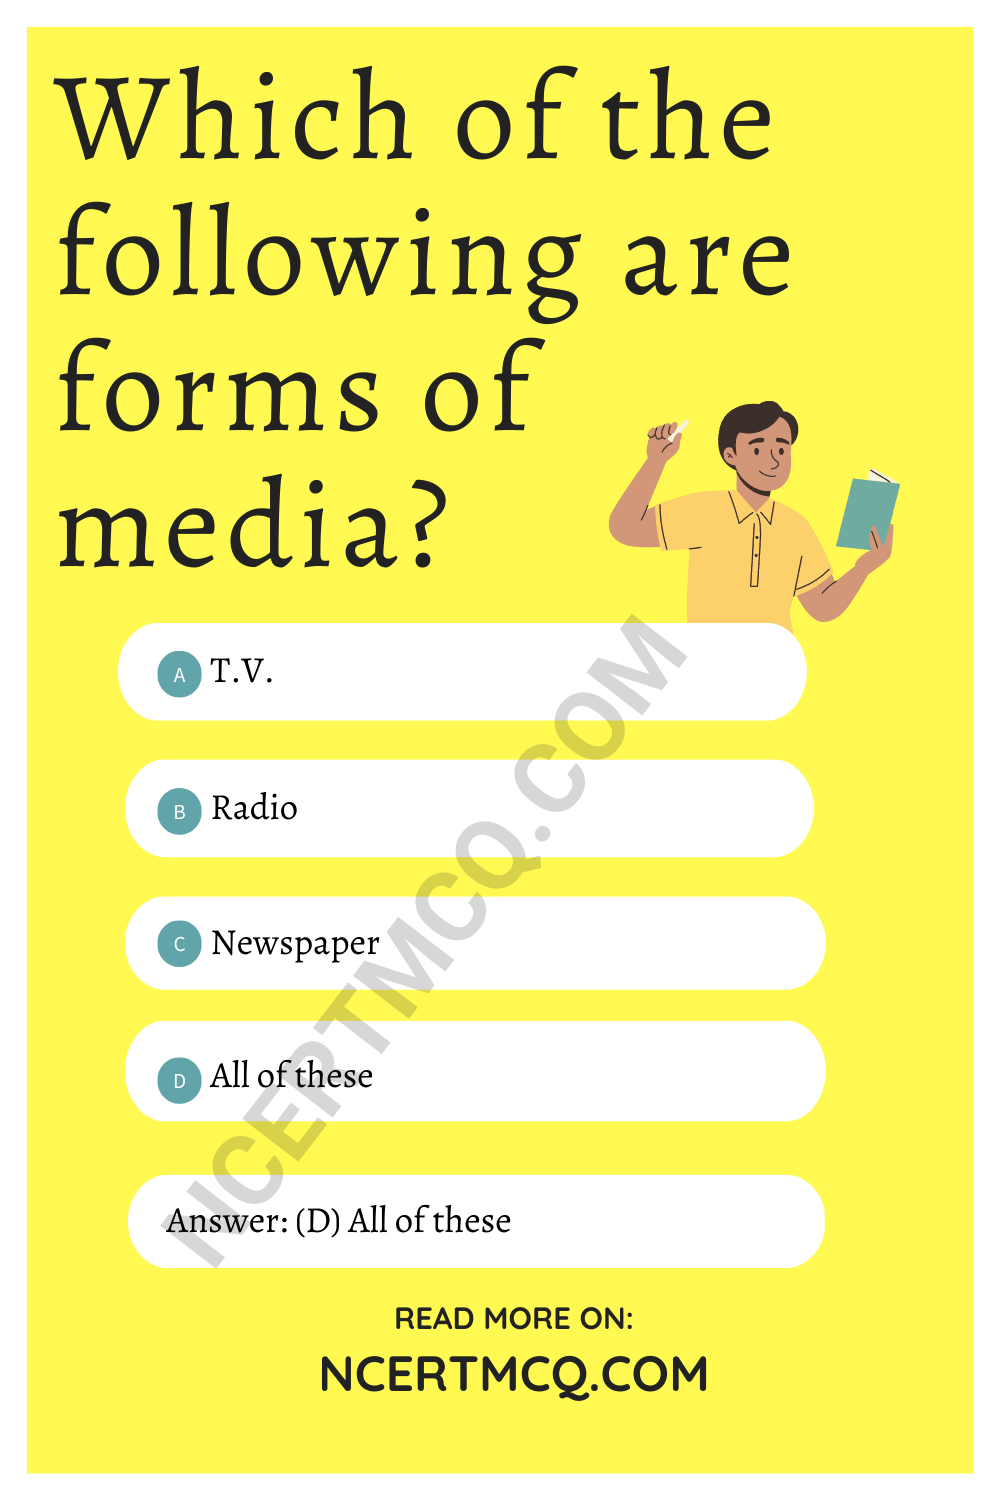 Which of the following are forms of media?